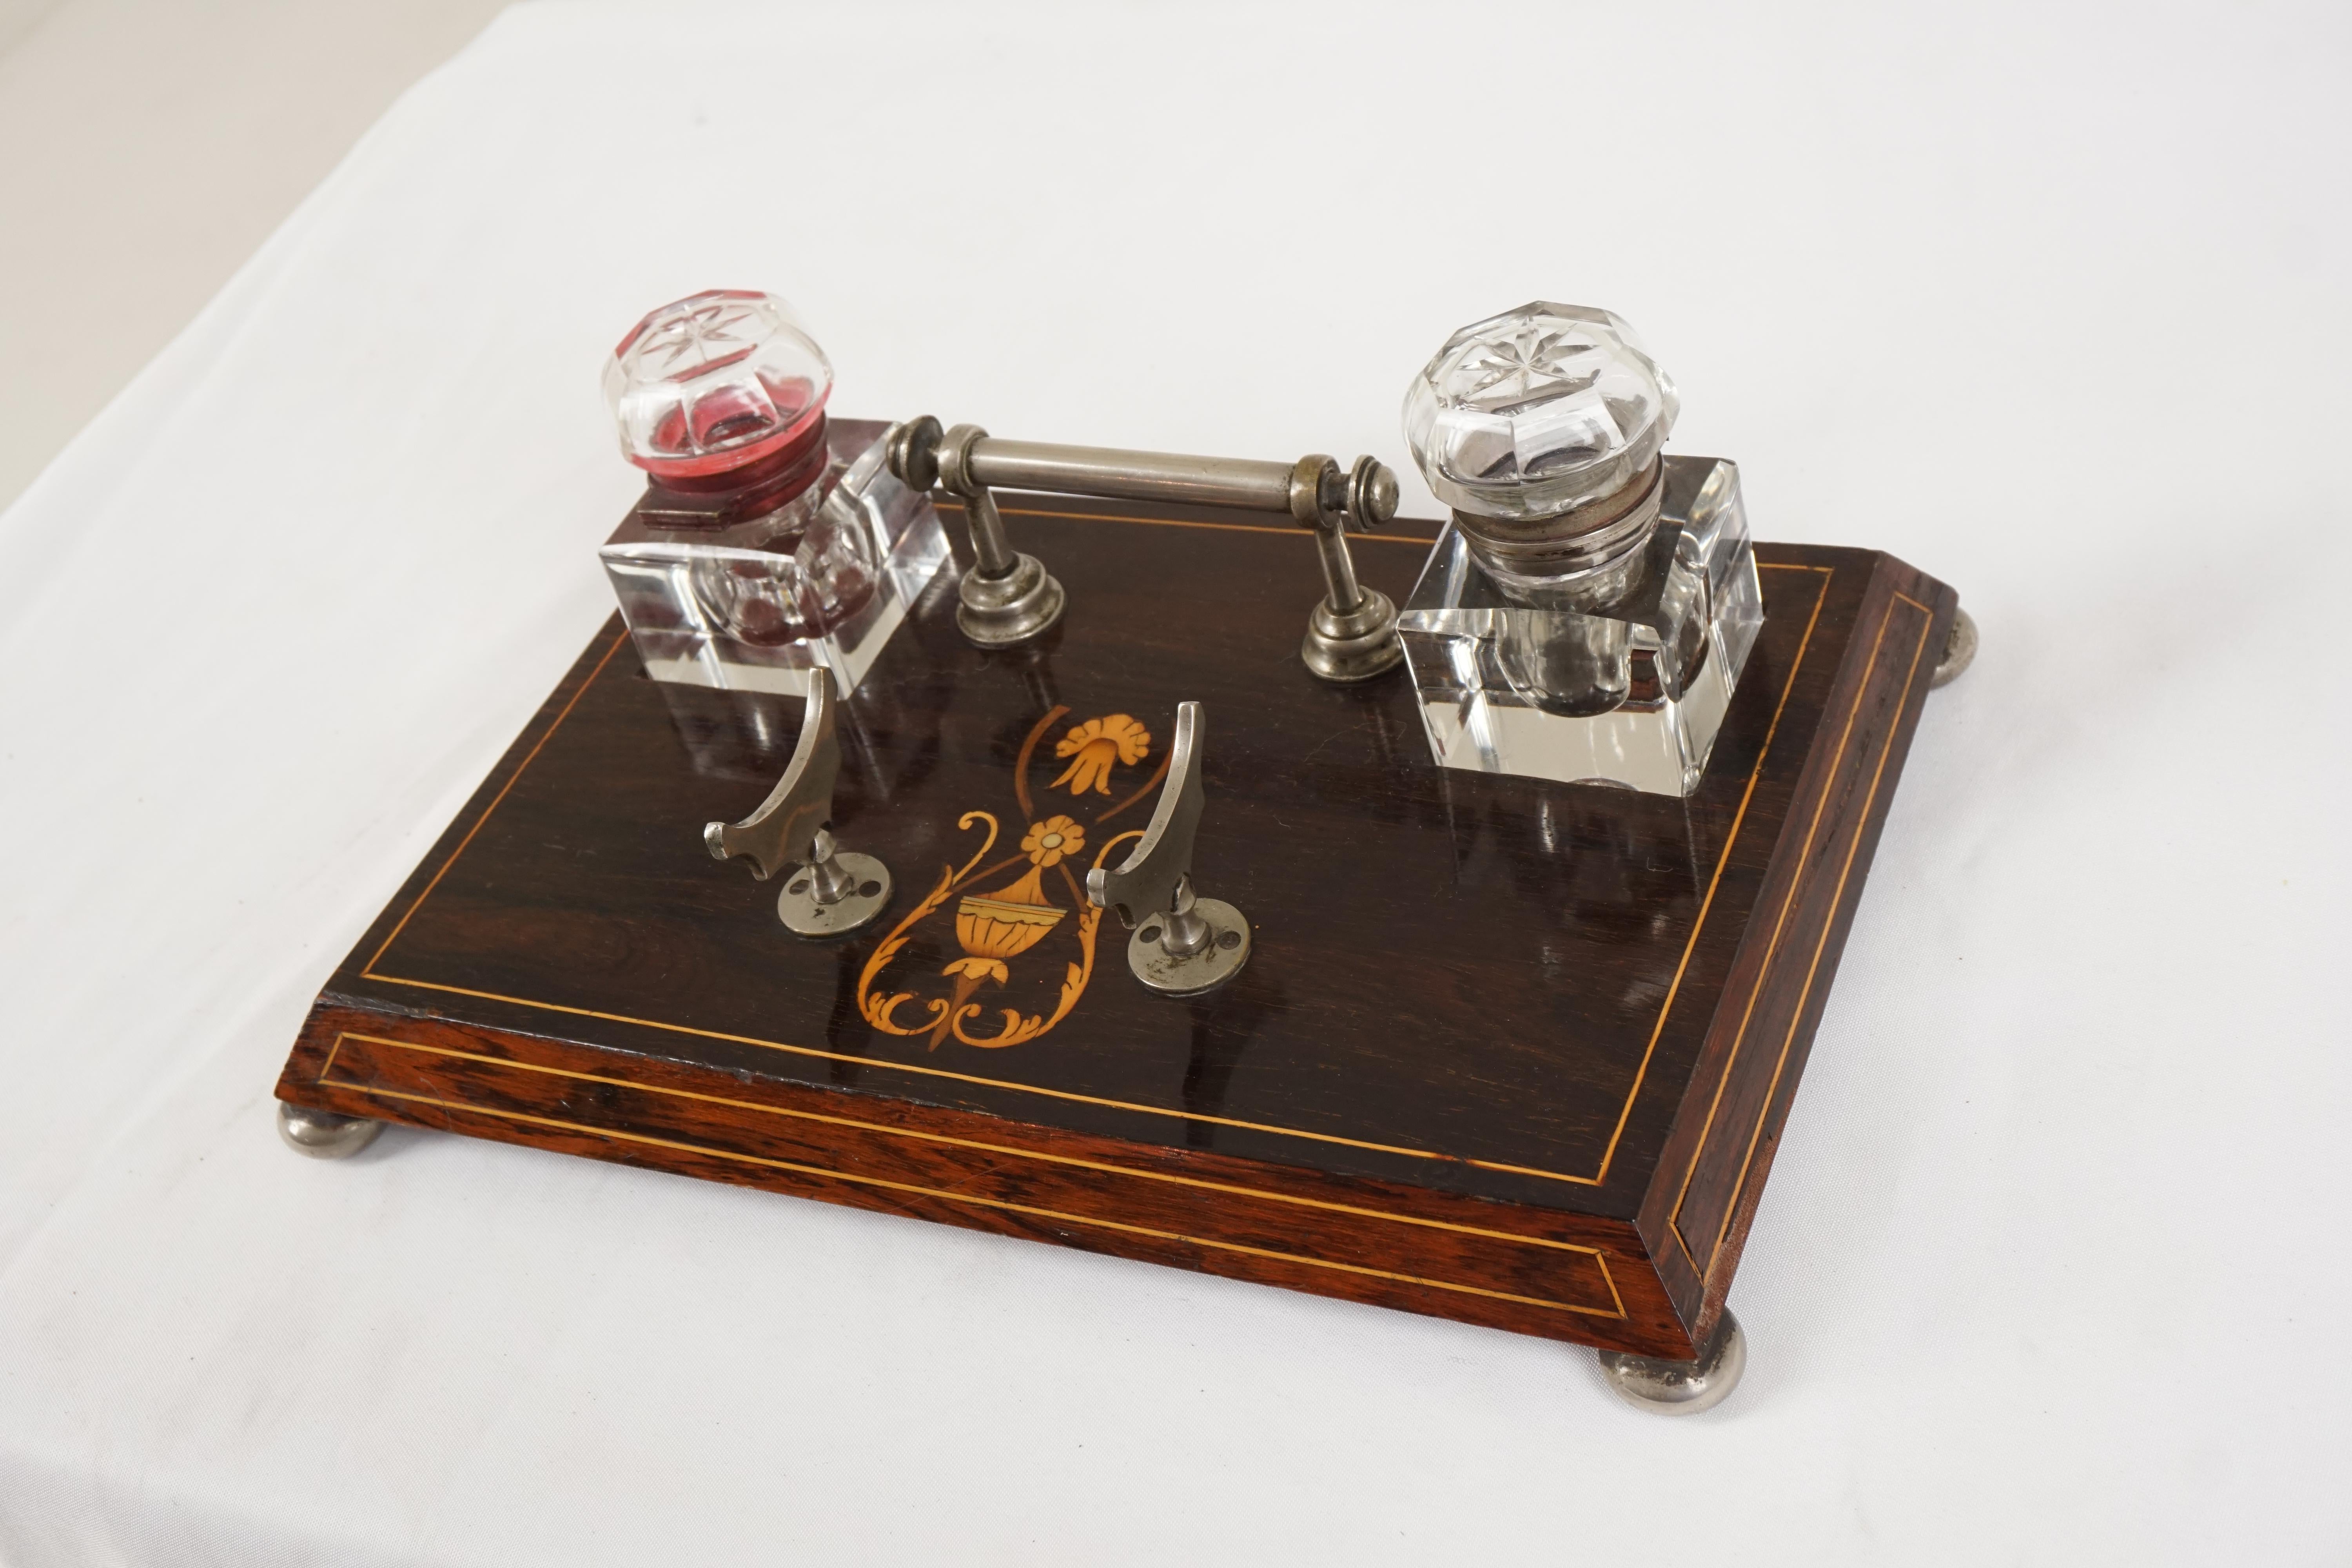 Antique Art Nouveau inkstand, Wood + kingwood inlaid, Scotland 1900, H627

Scotland 1900
Wood + kingwood
Pair of two crystal inkwells and lids with metal handles and a pen rest
Inlaid top
Satinwood inlaid stringing around the top and sides
All